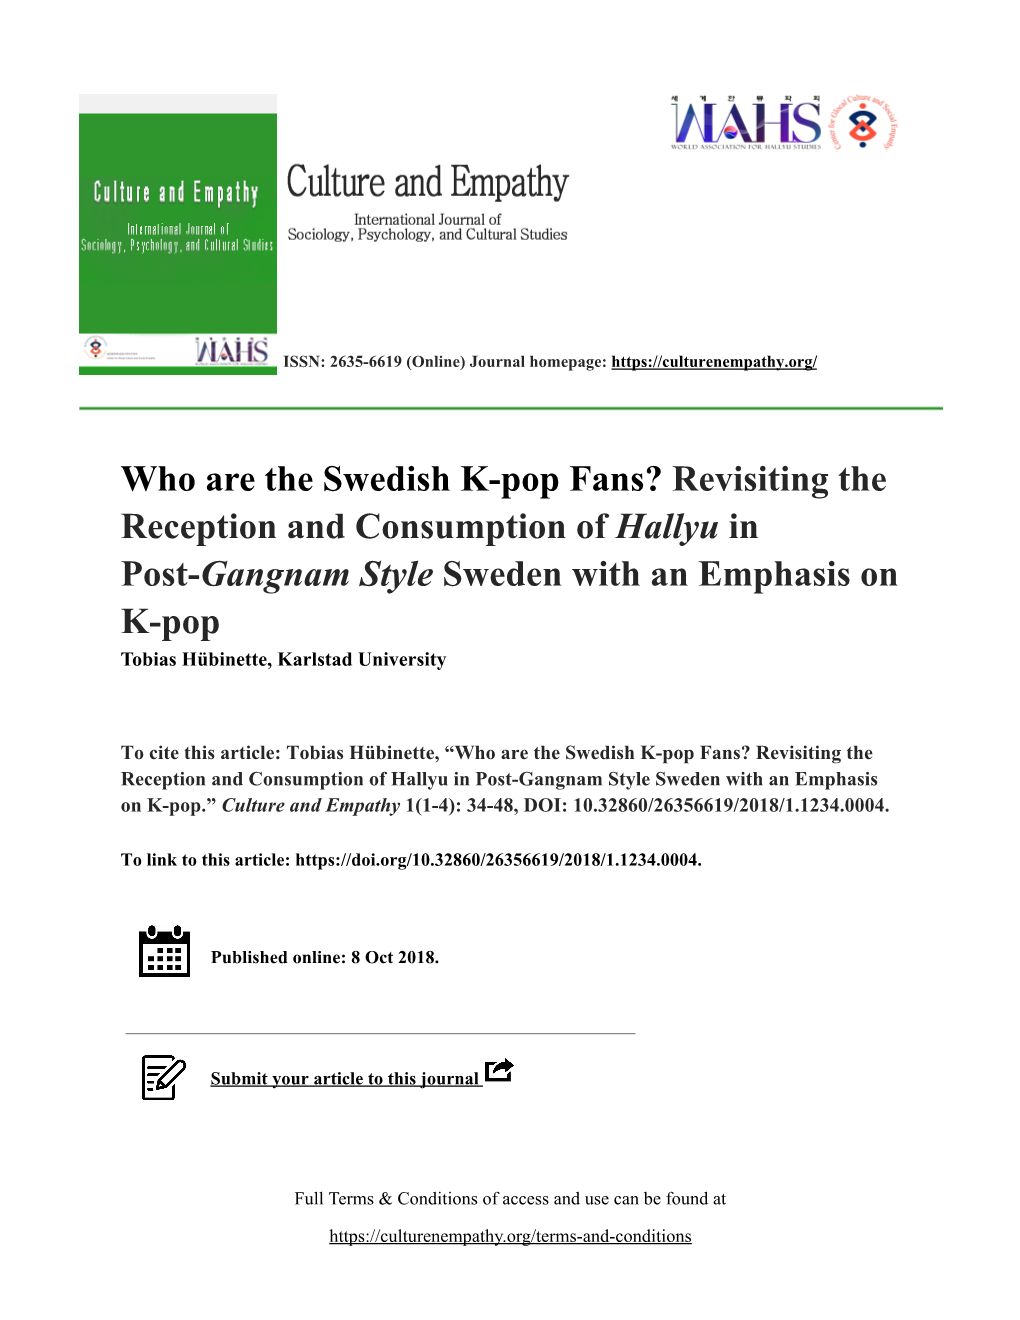 Who Are the Swedish K-Pop Fans? Revisiting the Reception and Consumption of Hallyu in Post- Gangnam Style Sweden with an Empha